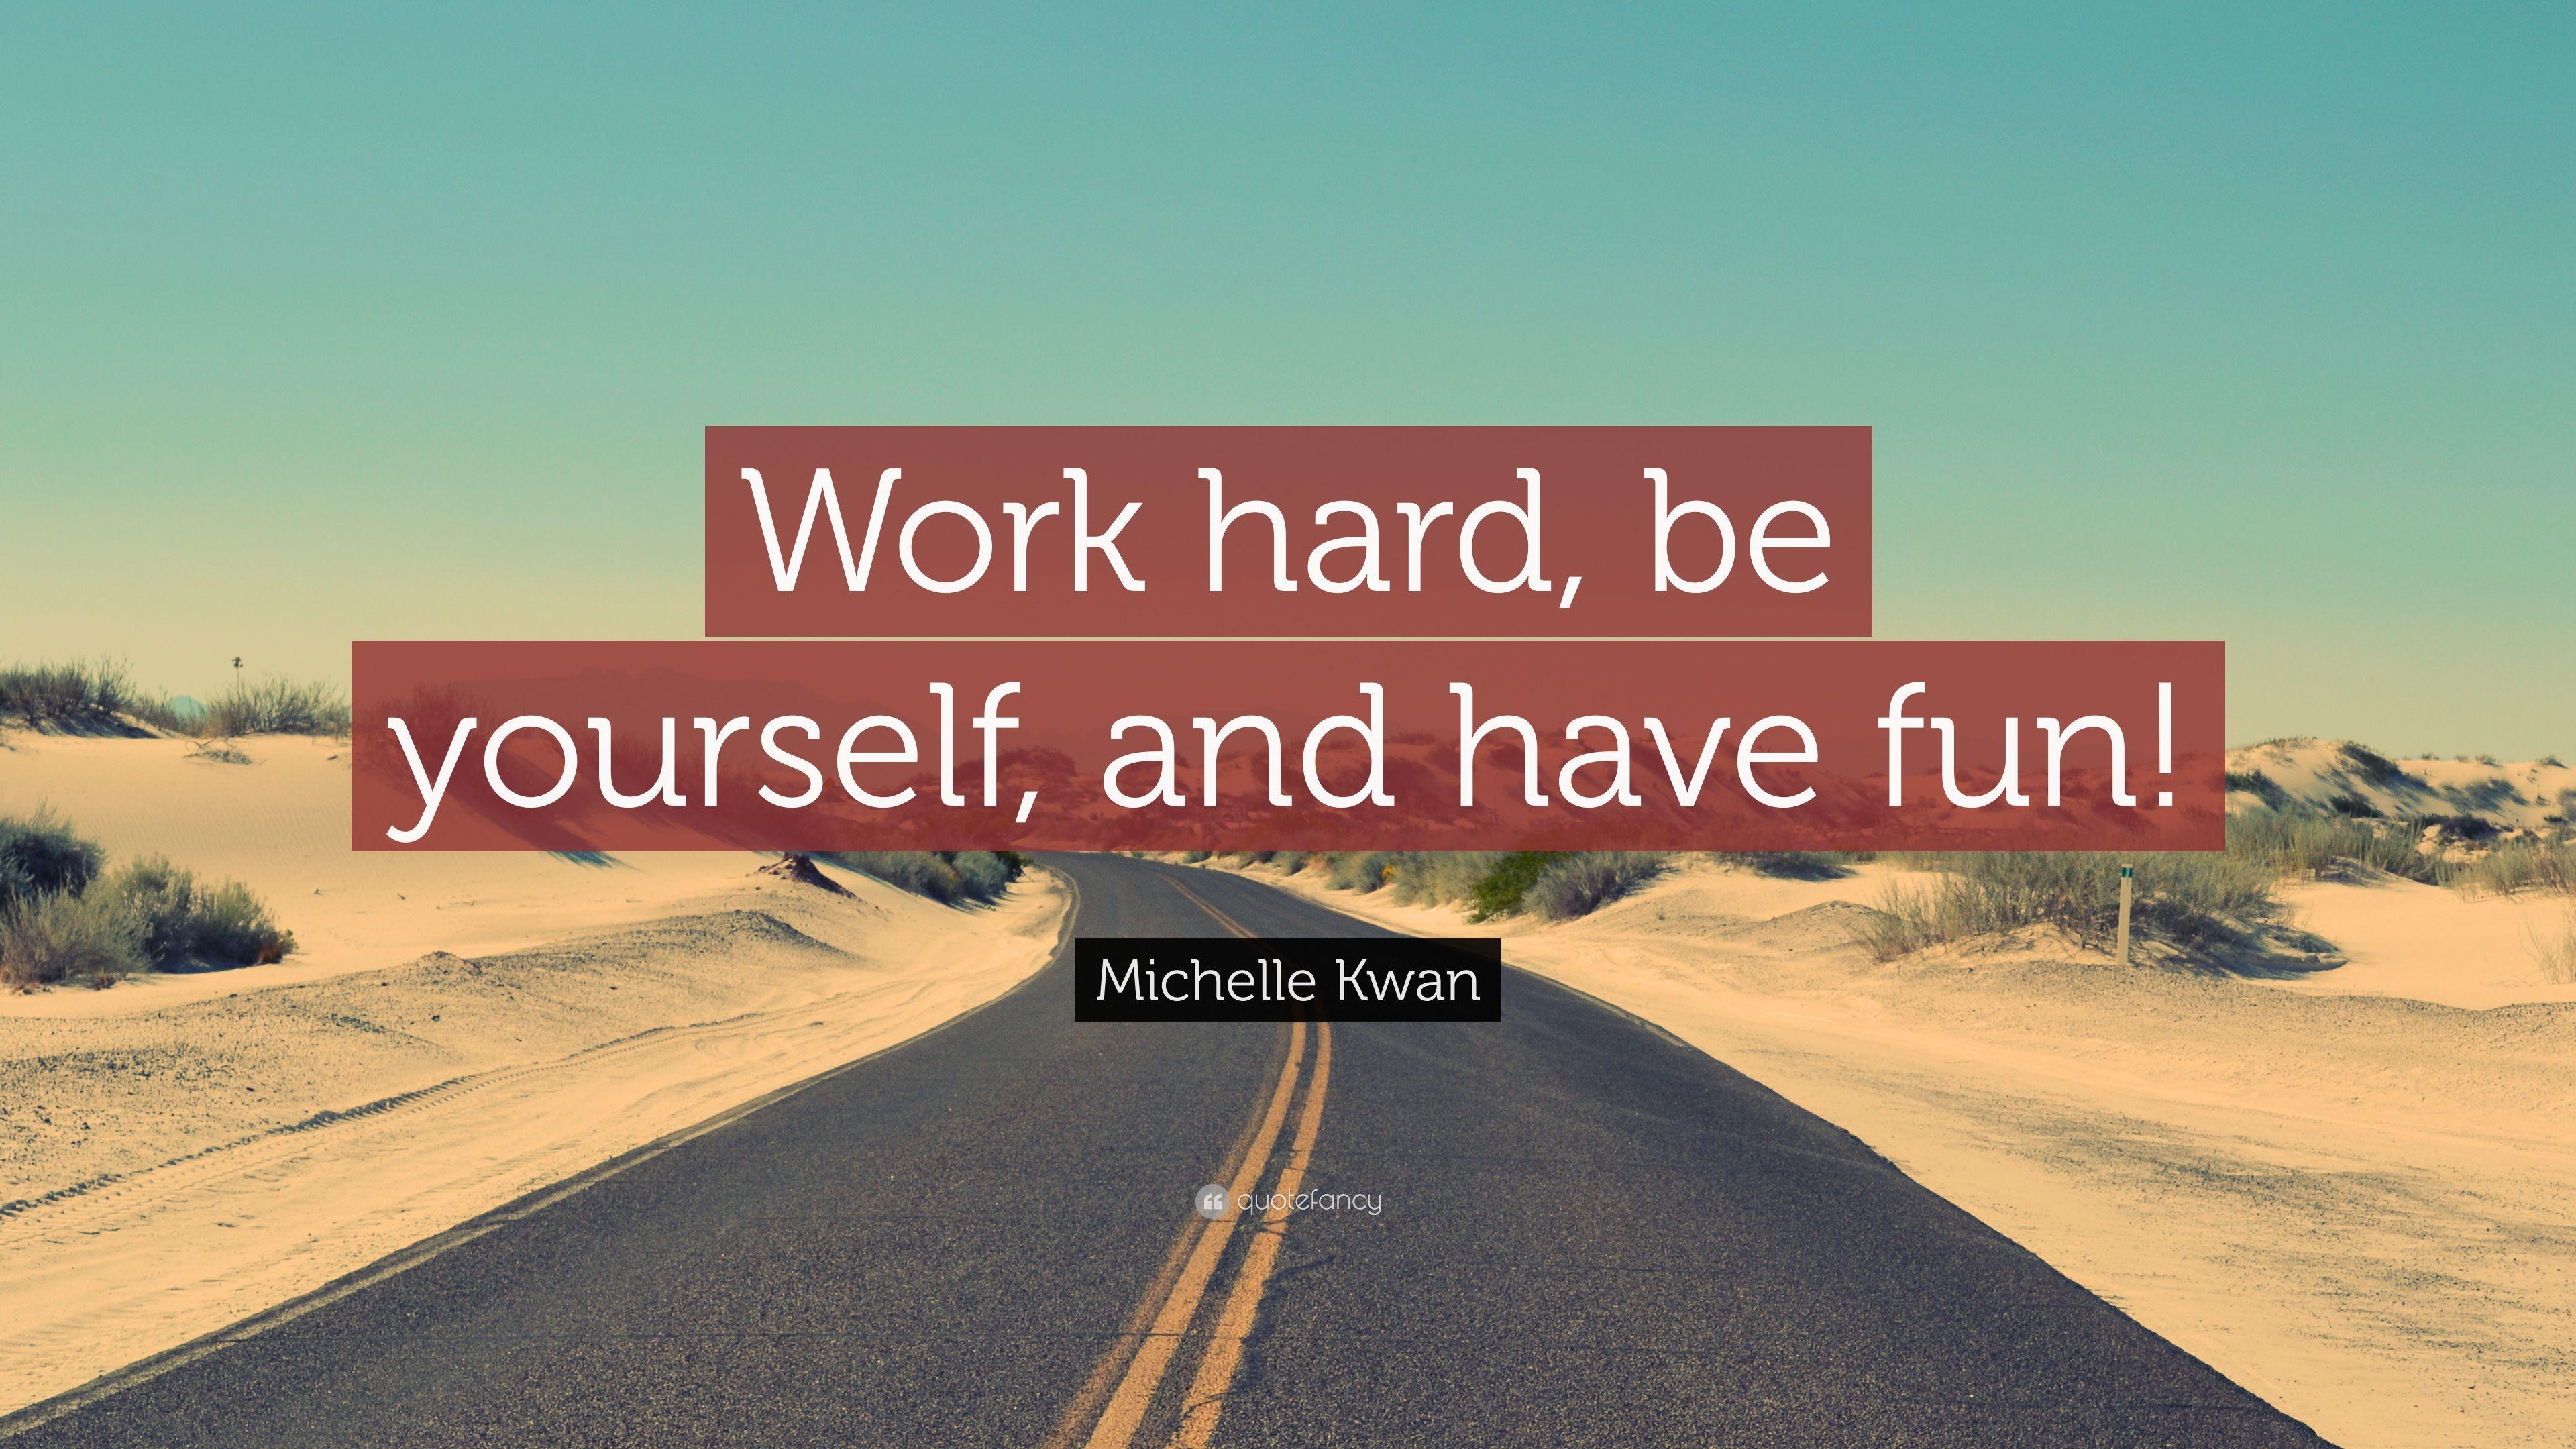 Michelle Kwan Quote: “Work hard, be yourself, and have fun!” 10